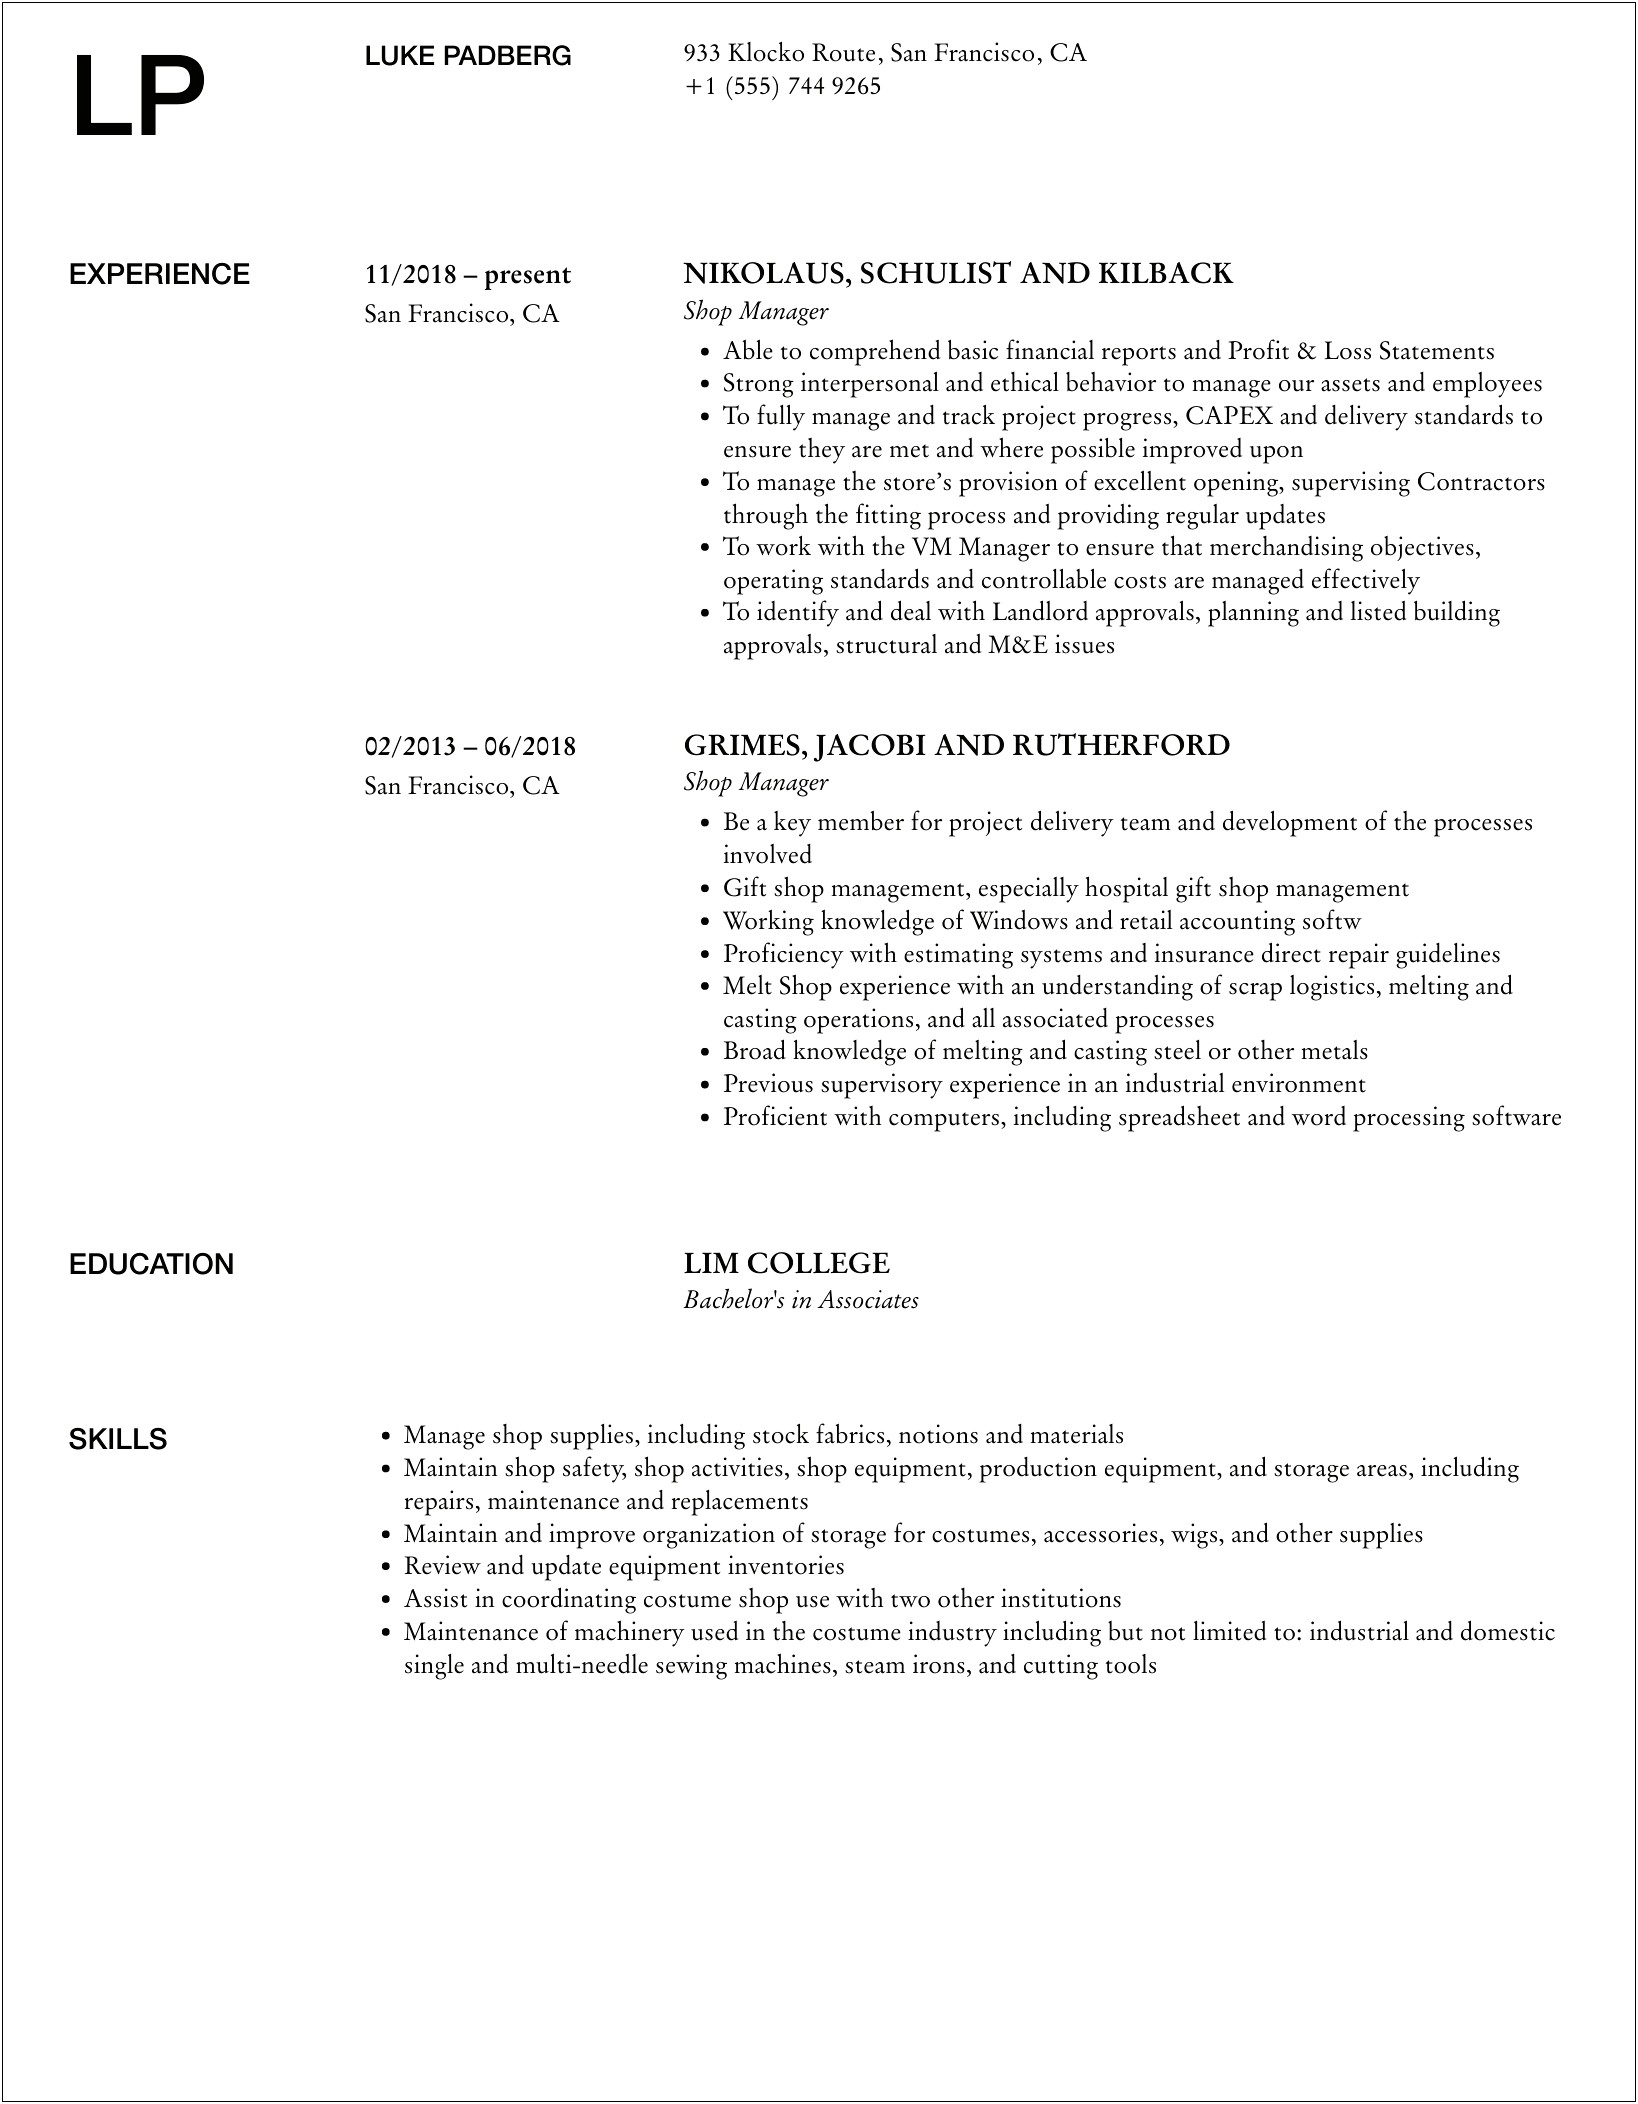 Theater Costume Shop Manager Resume Example